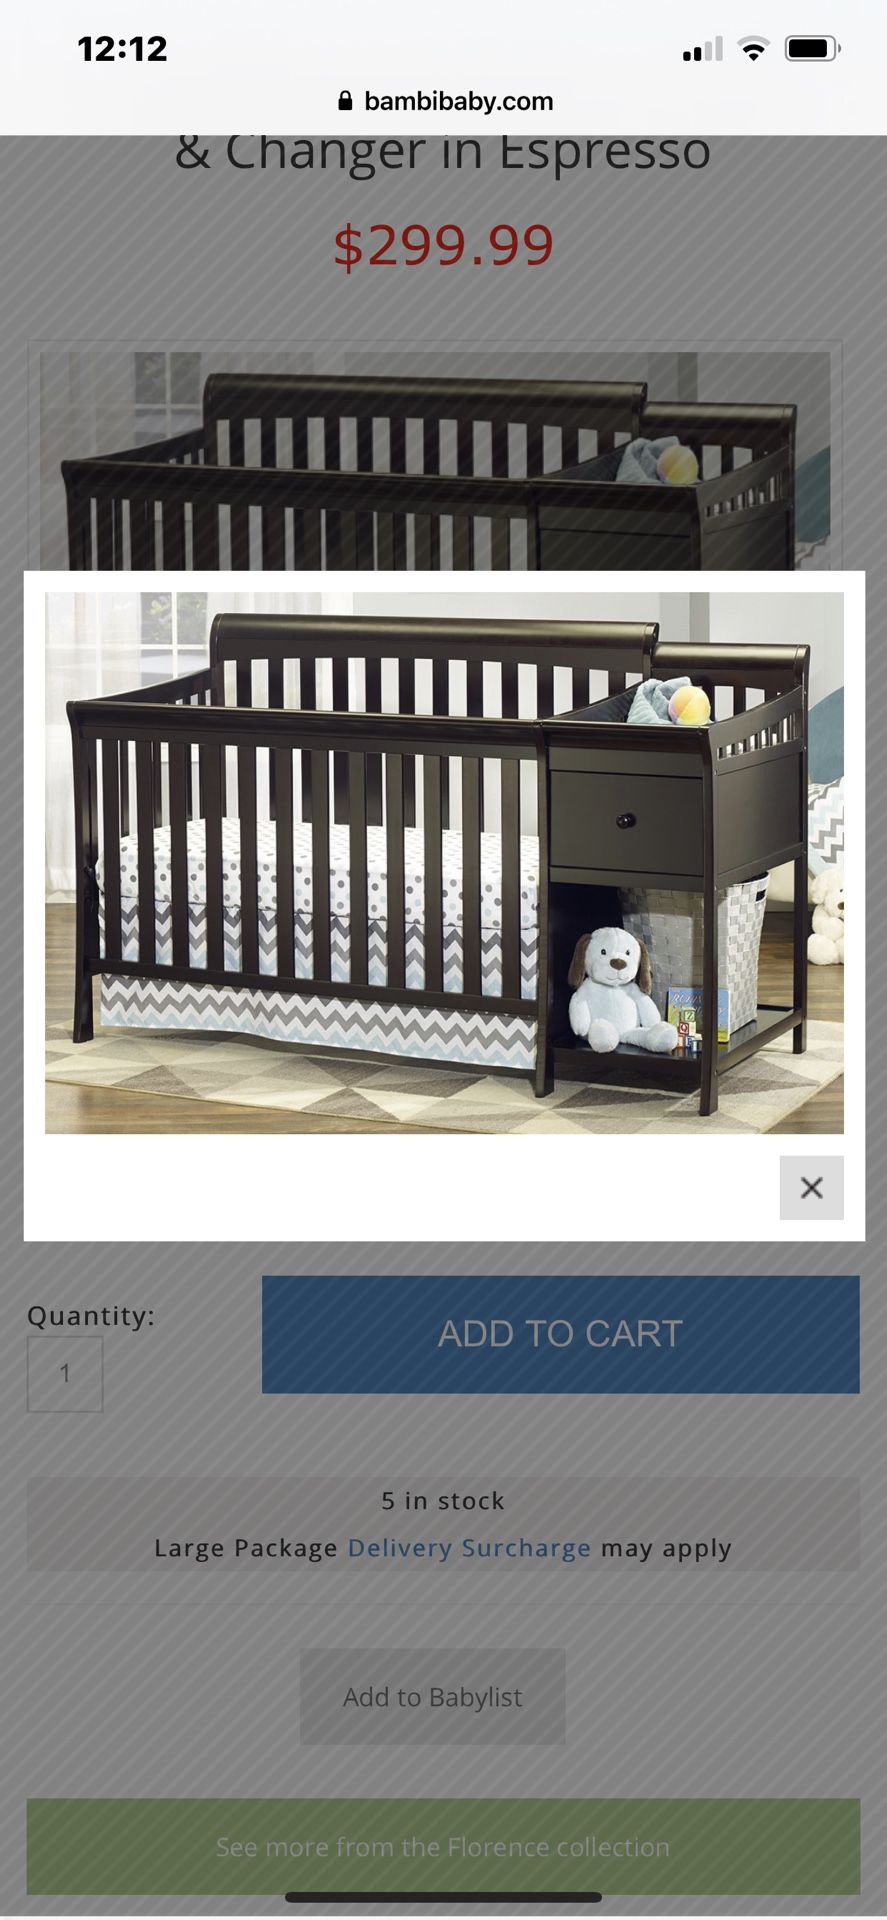 Sorelle Florence 4n1 crib and changing table